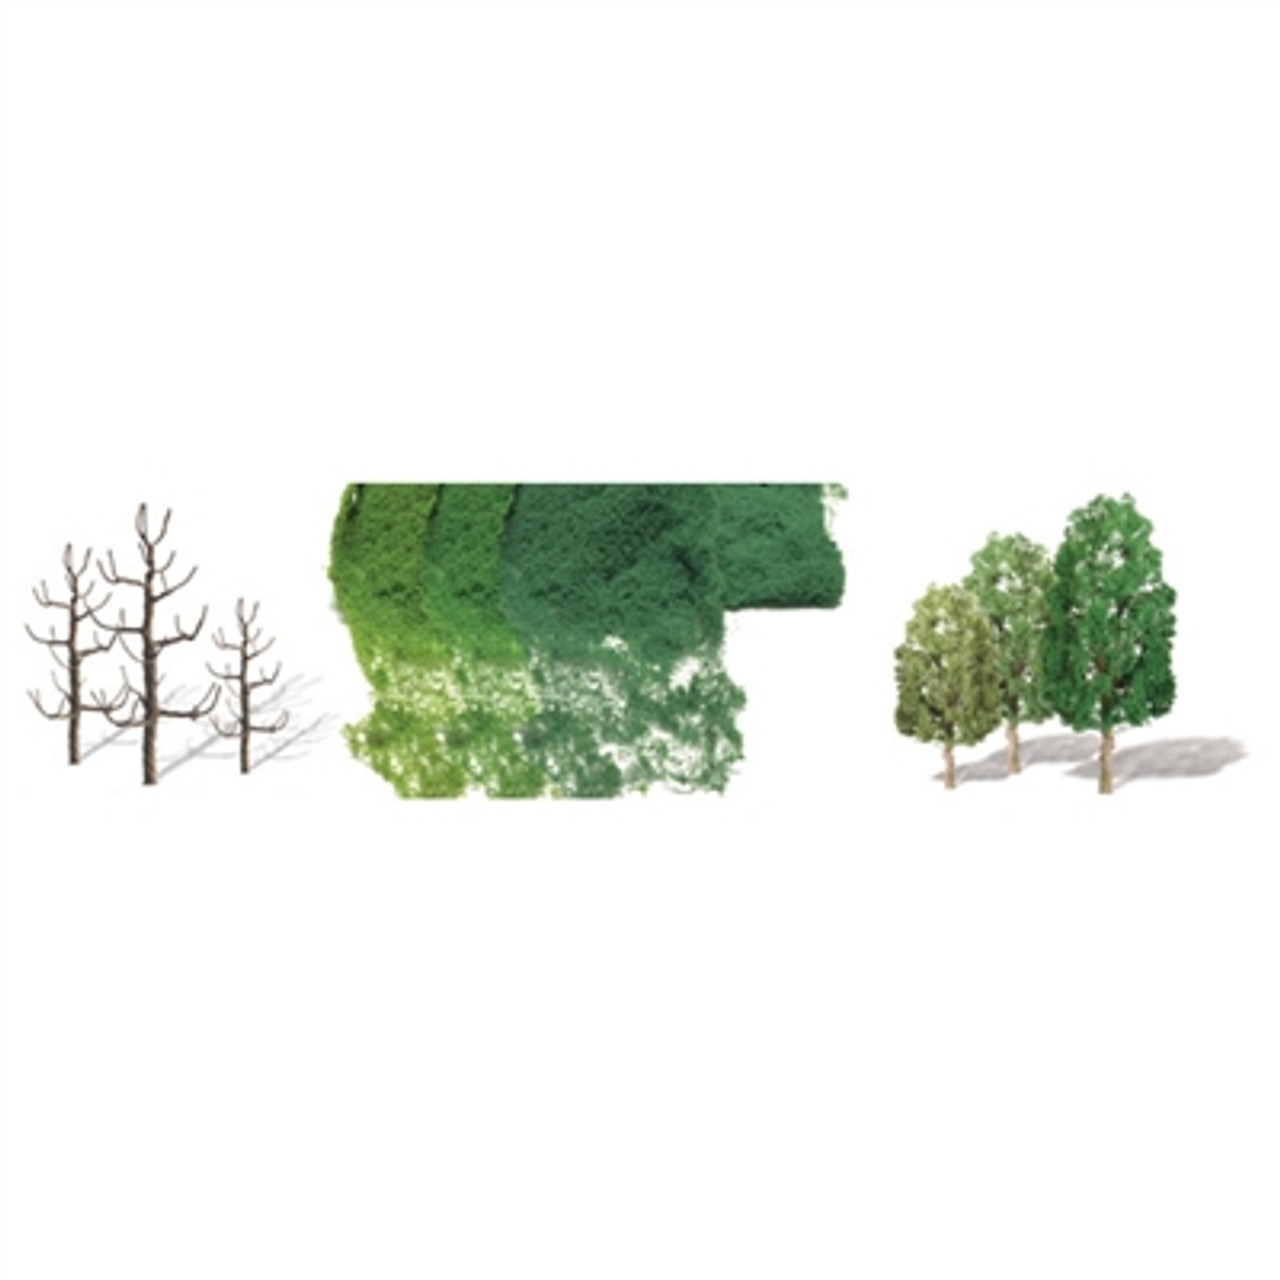 JTT Scenery 92023 N Professional Trees Sycamore 1.5" to 3" Pro Kit